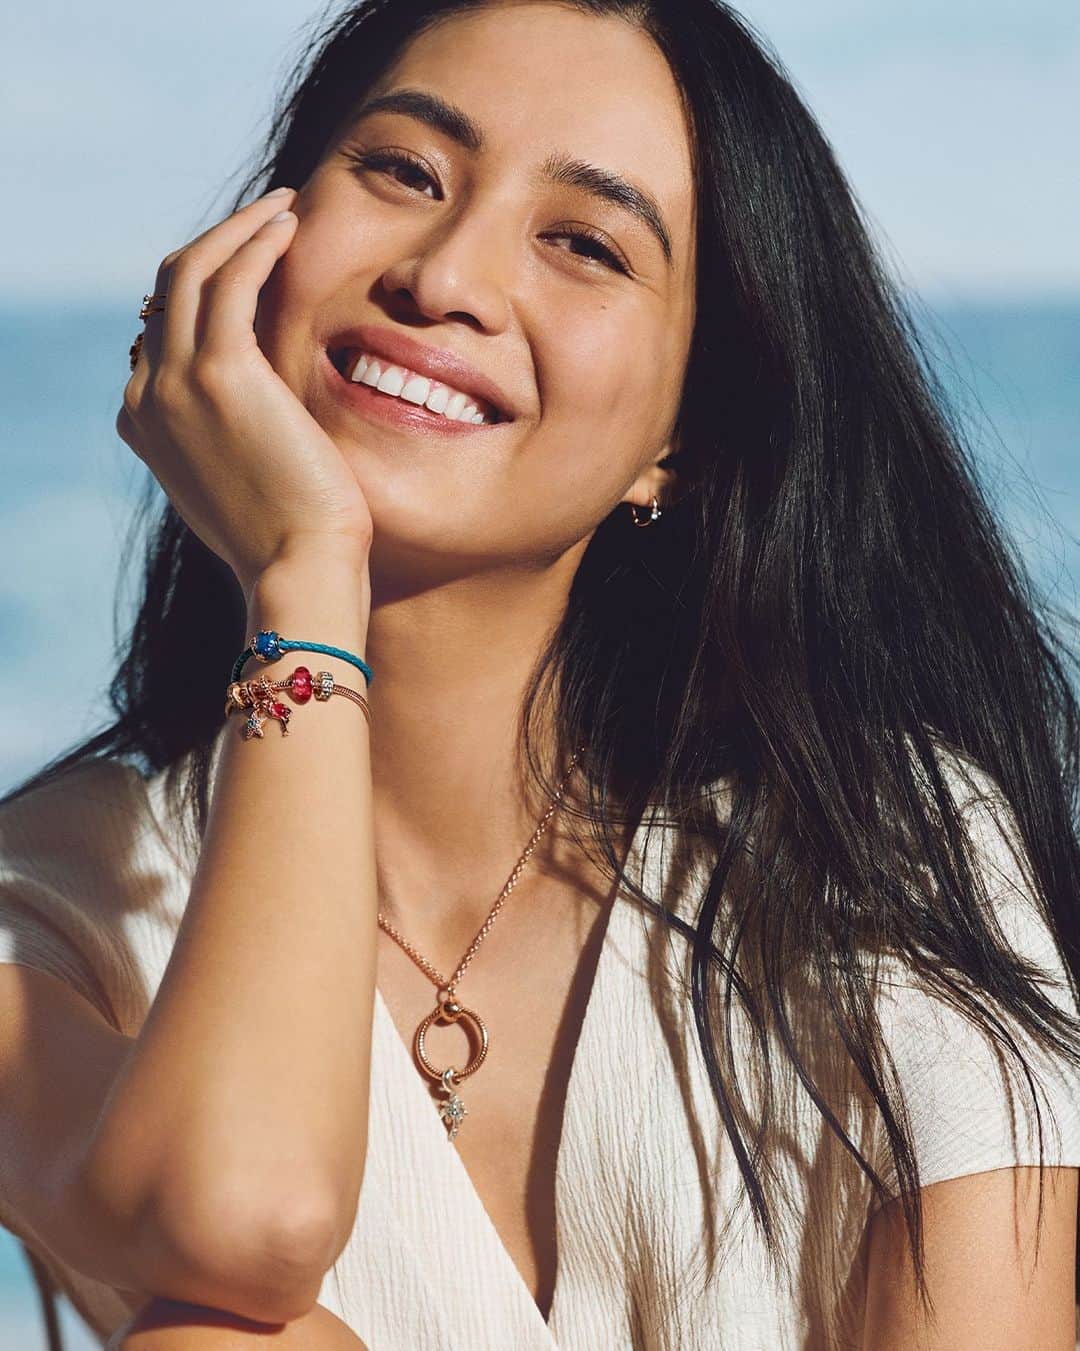 PANDORAのインスタグラム：「All about the glow. Enhance your summer skin with warm, rose gold-toned pieces and get ready for smiles all around. 🌟#PandoraOcean #PandoraStyle #Summer」